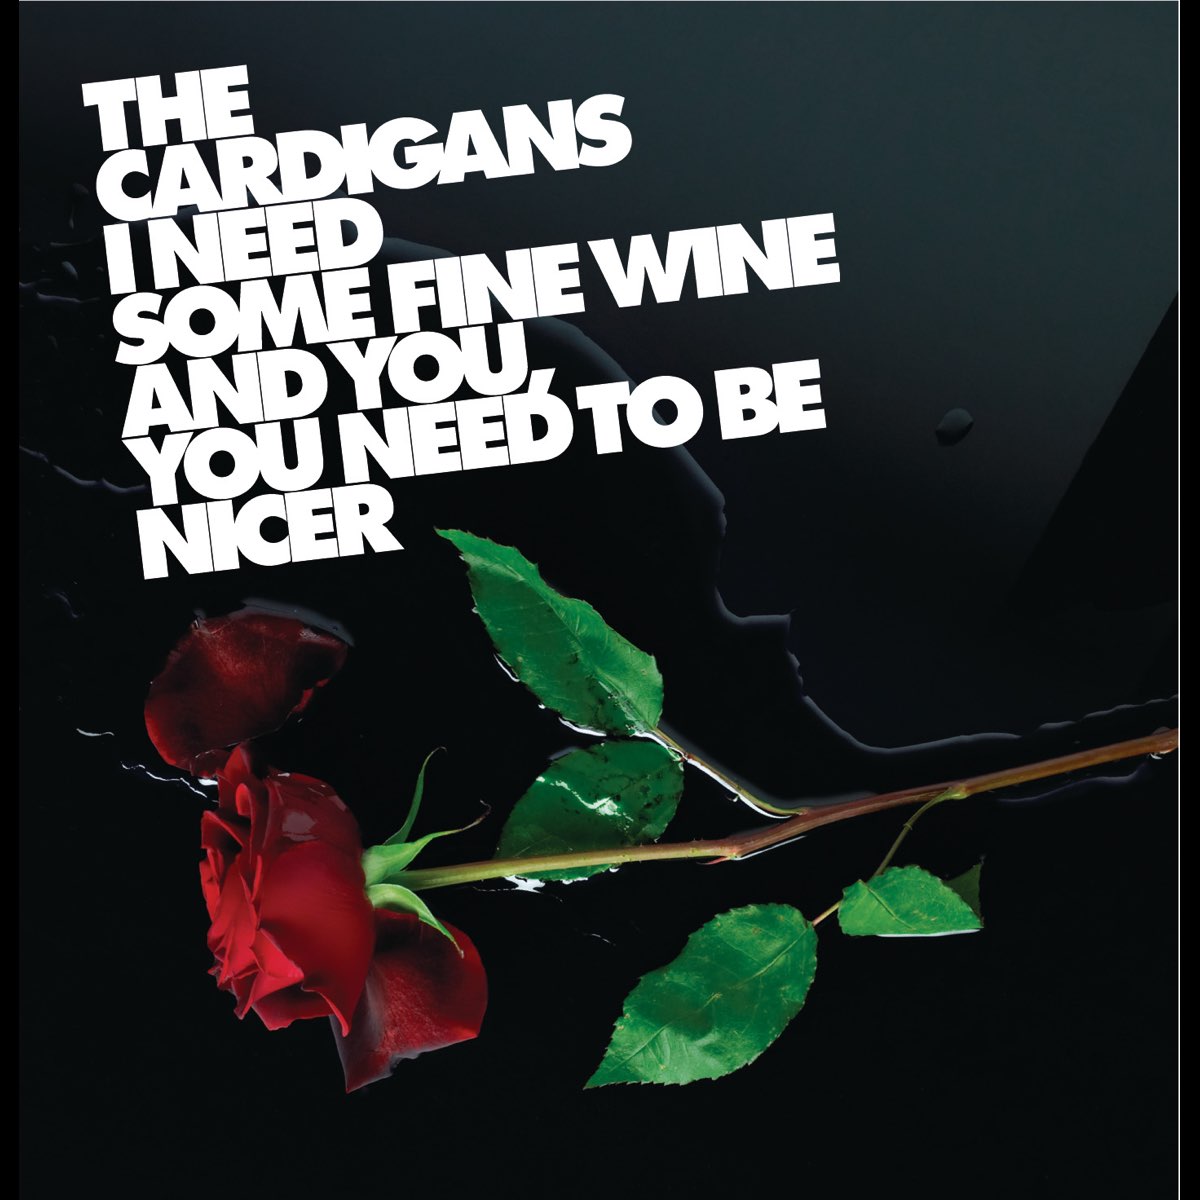 The Cardigans I Need Some Fine Wine And You, You Need To Be Nicer cover artwork